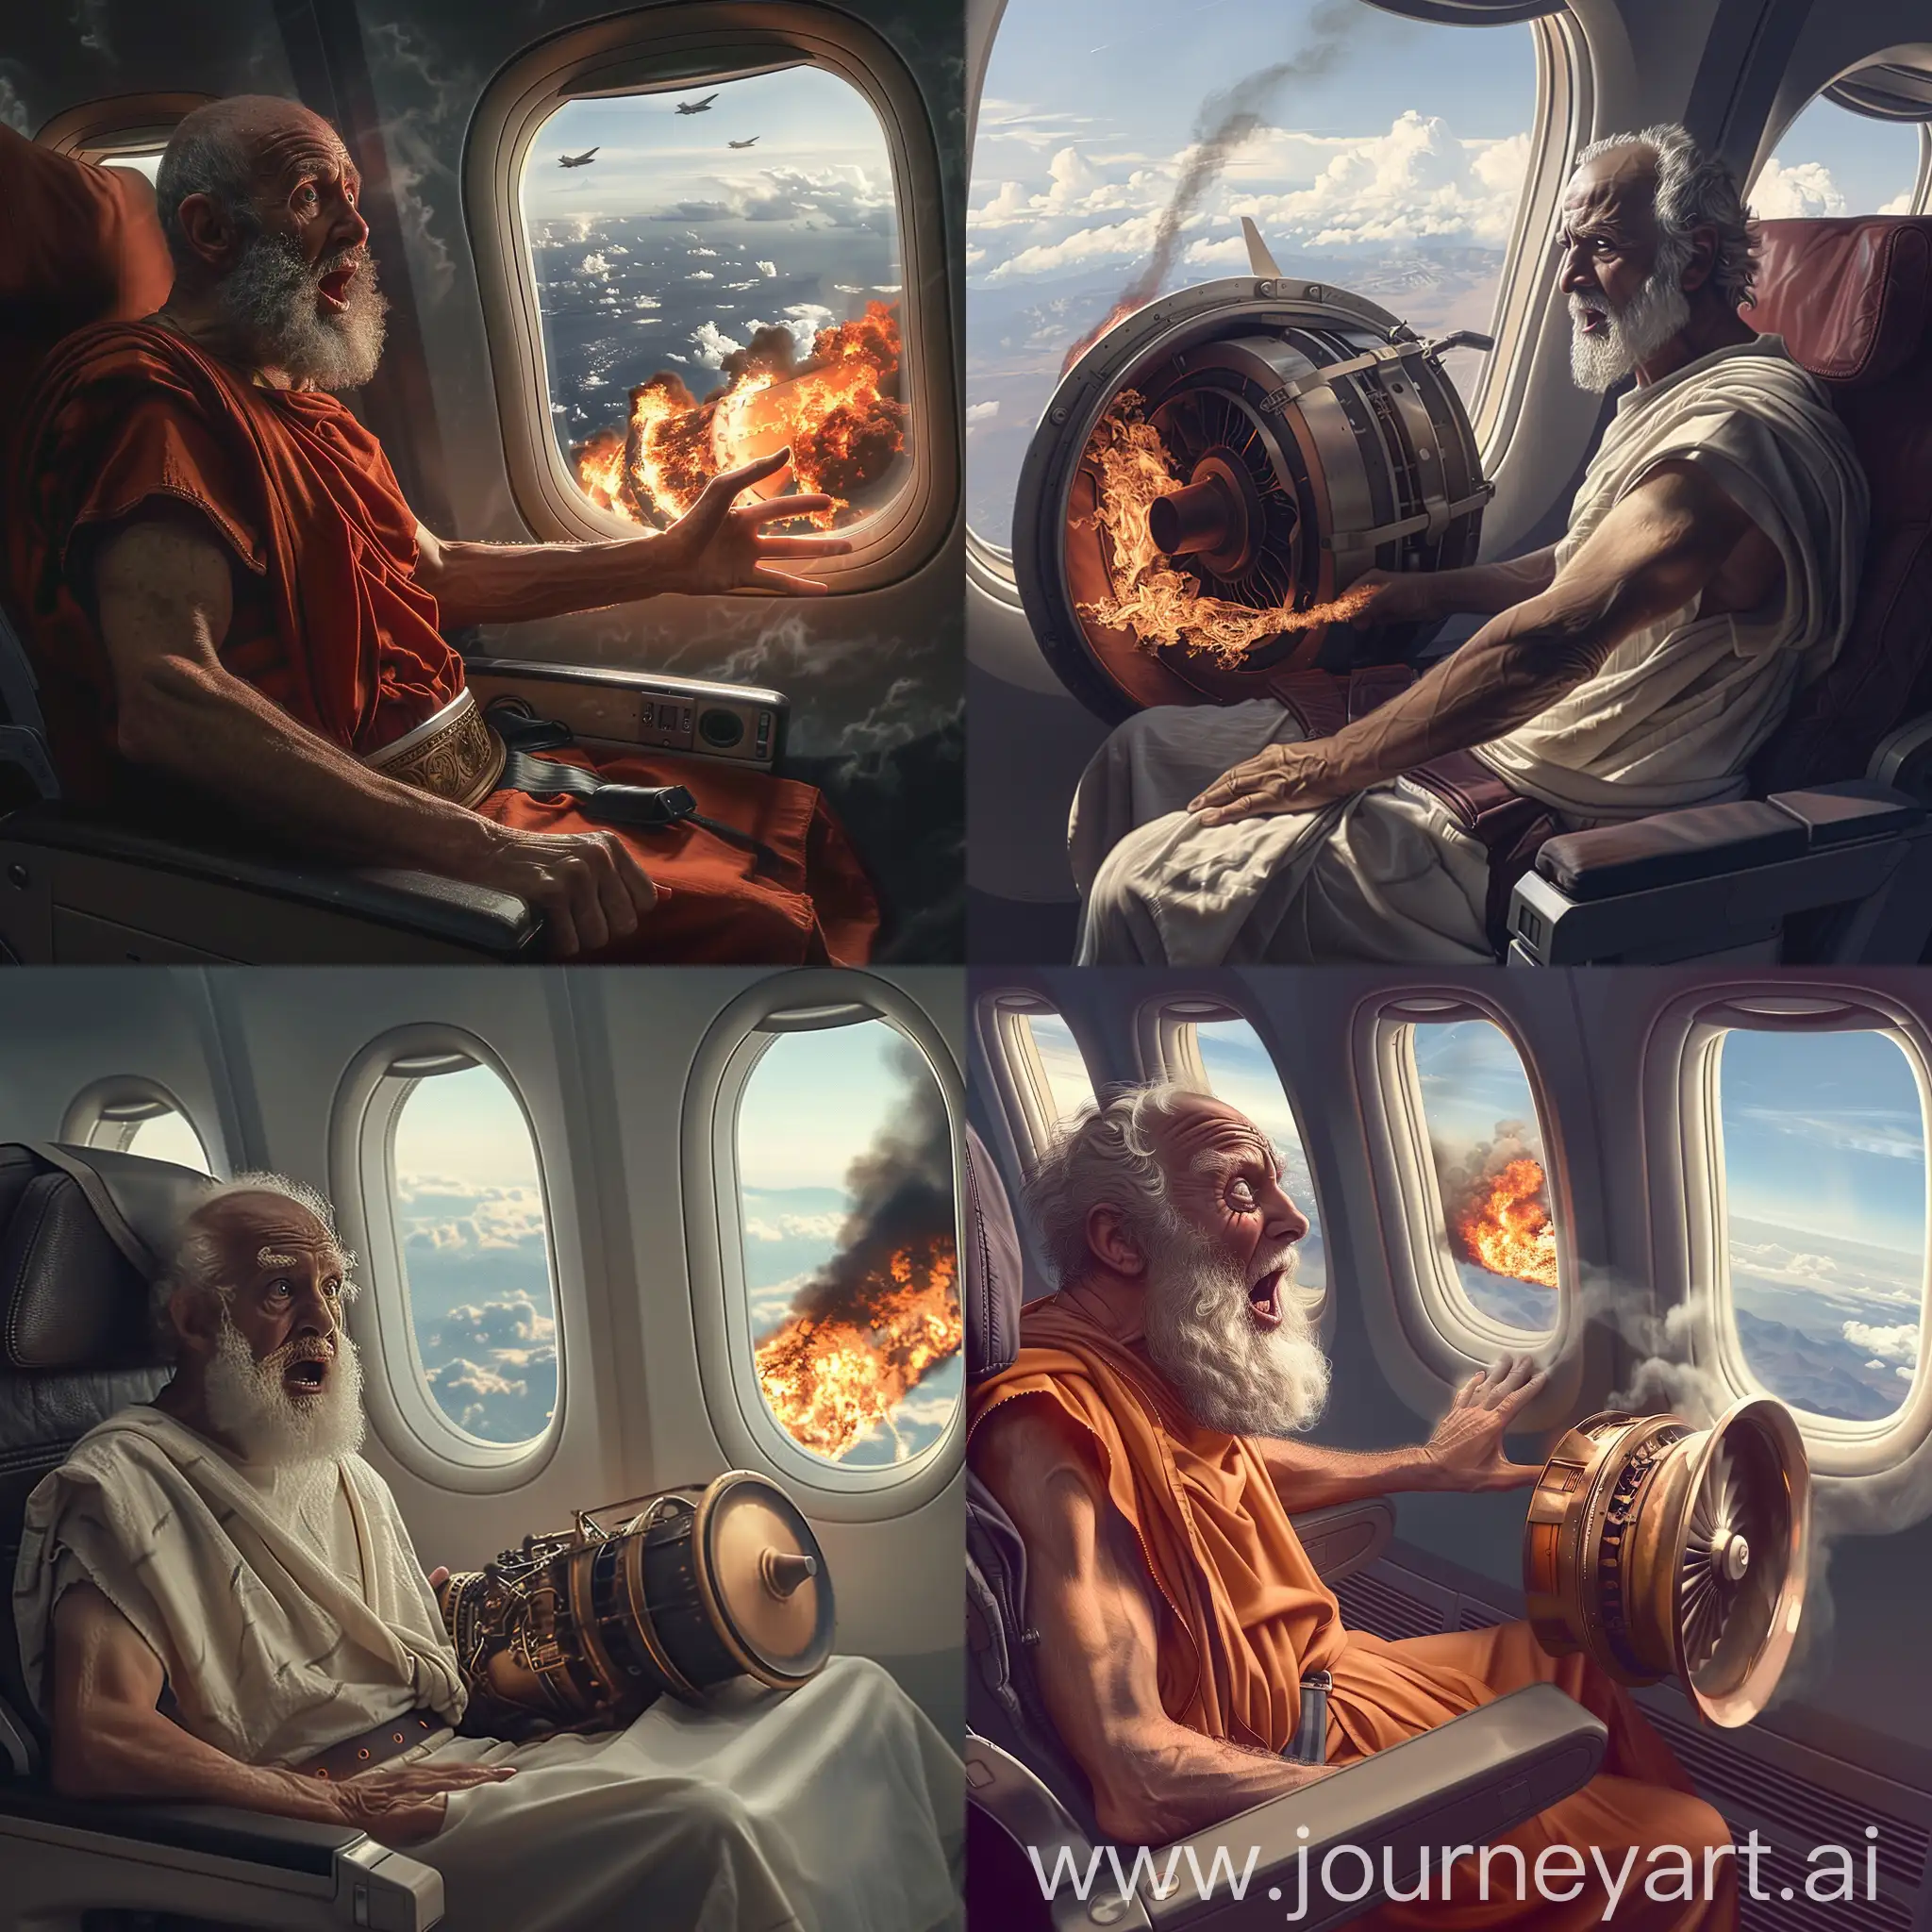 Ancient-Greek-Philosopher-on-Airplane-Witnessing-Engine-Fire